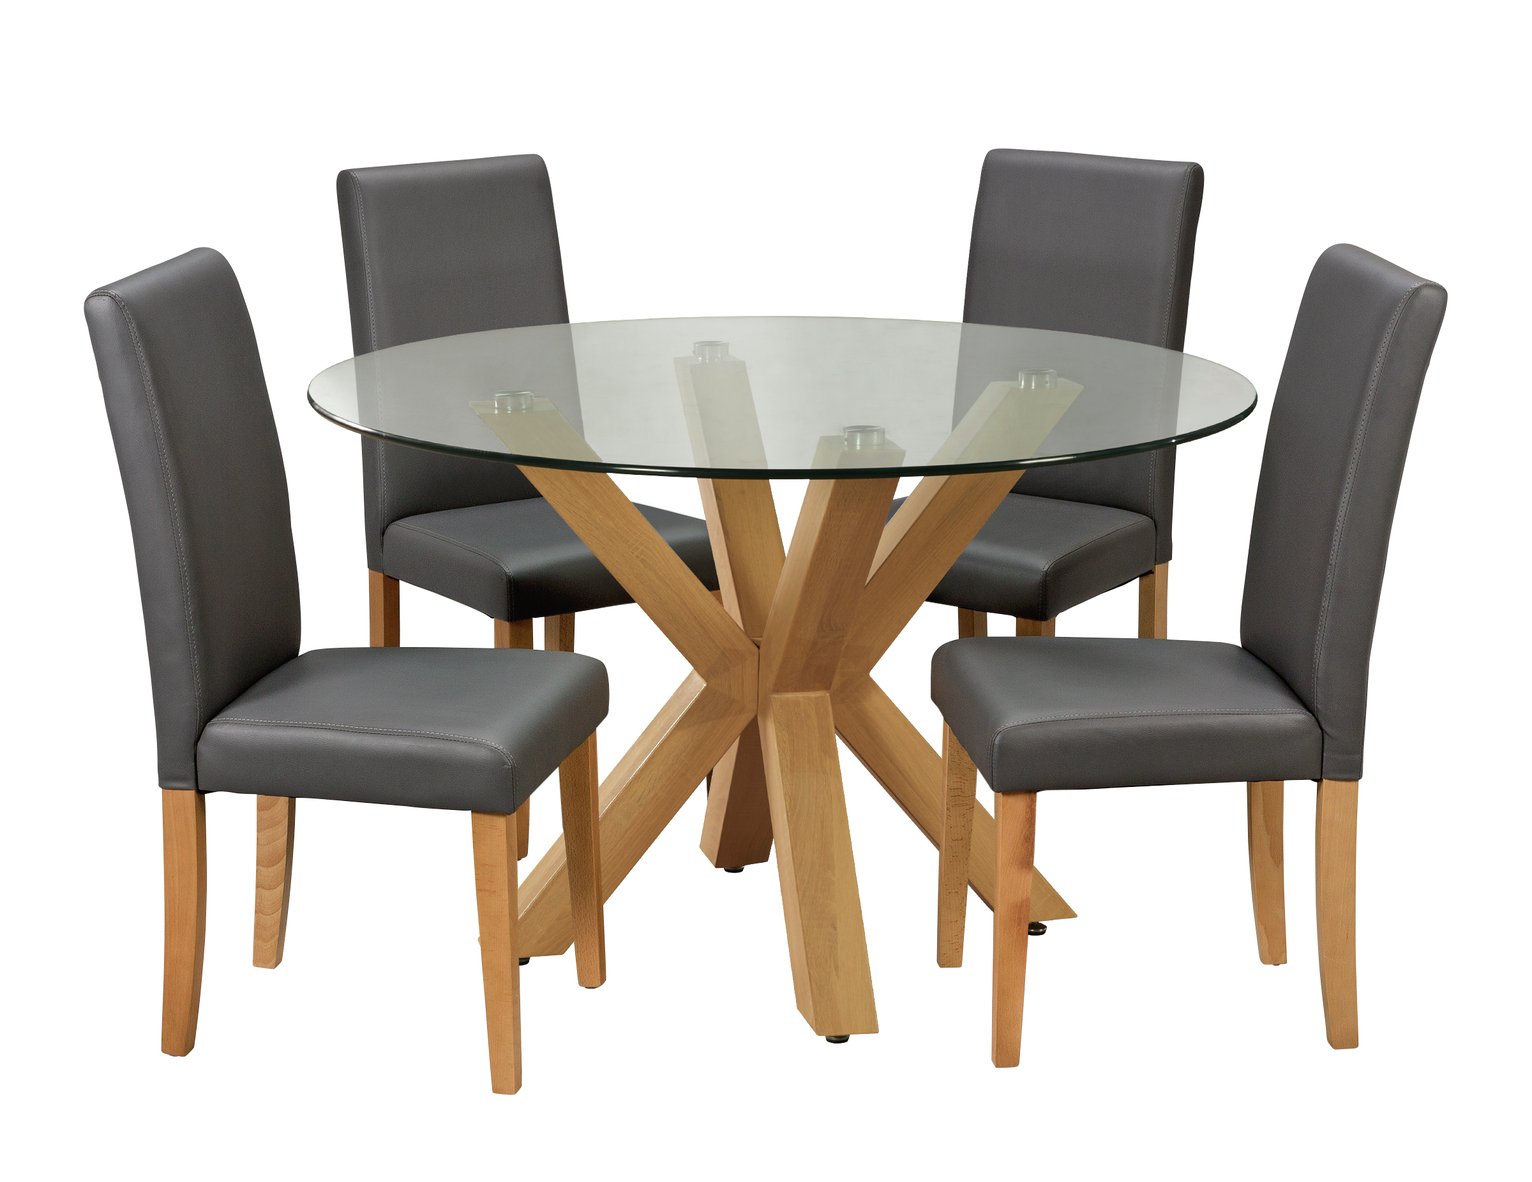 Argos Home Alden Glass Dining Table & 4 Charcoal Chairs